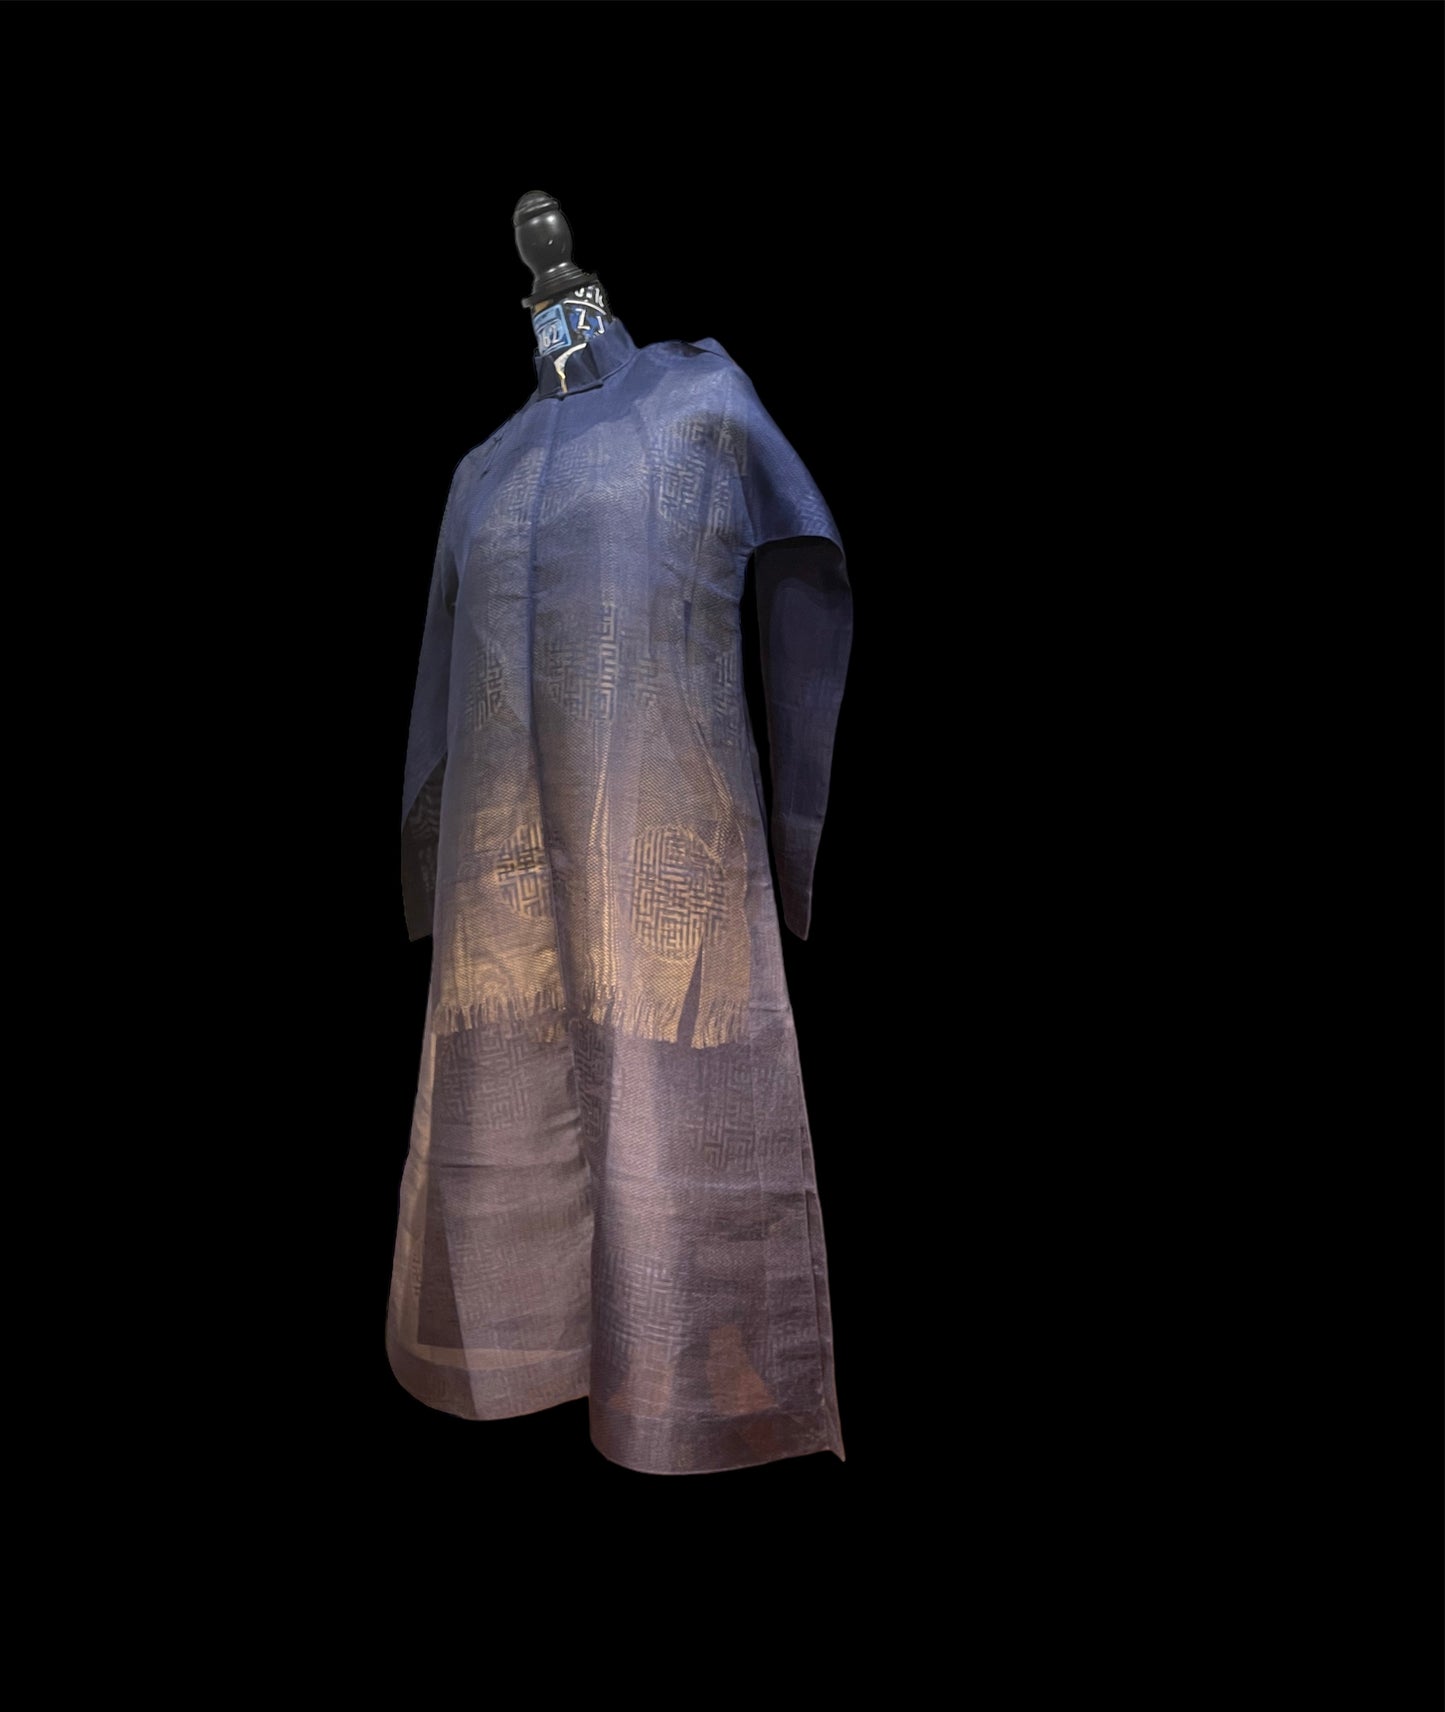 Antique see- through Chinese robe/ Dress made with antique Chinese silk gauze